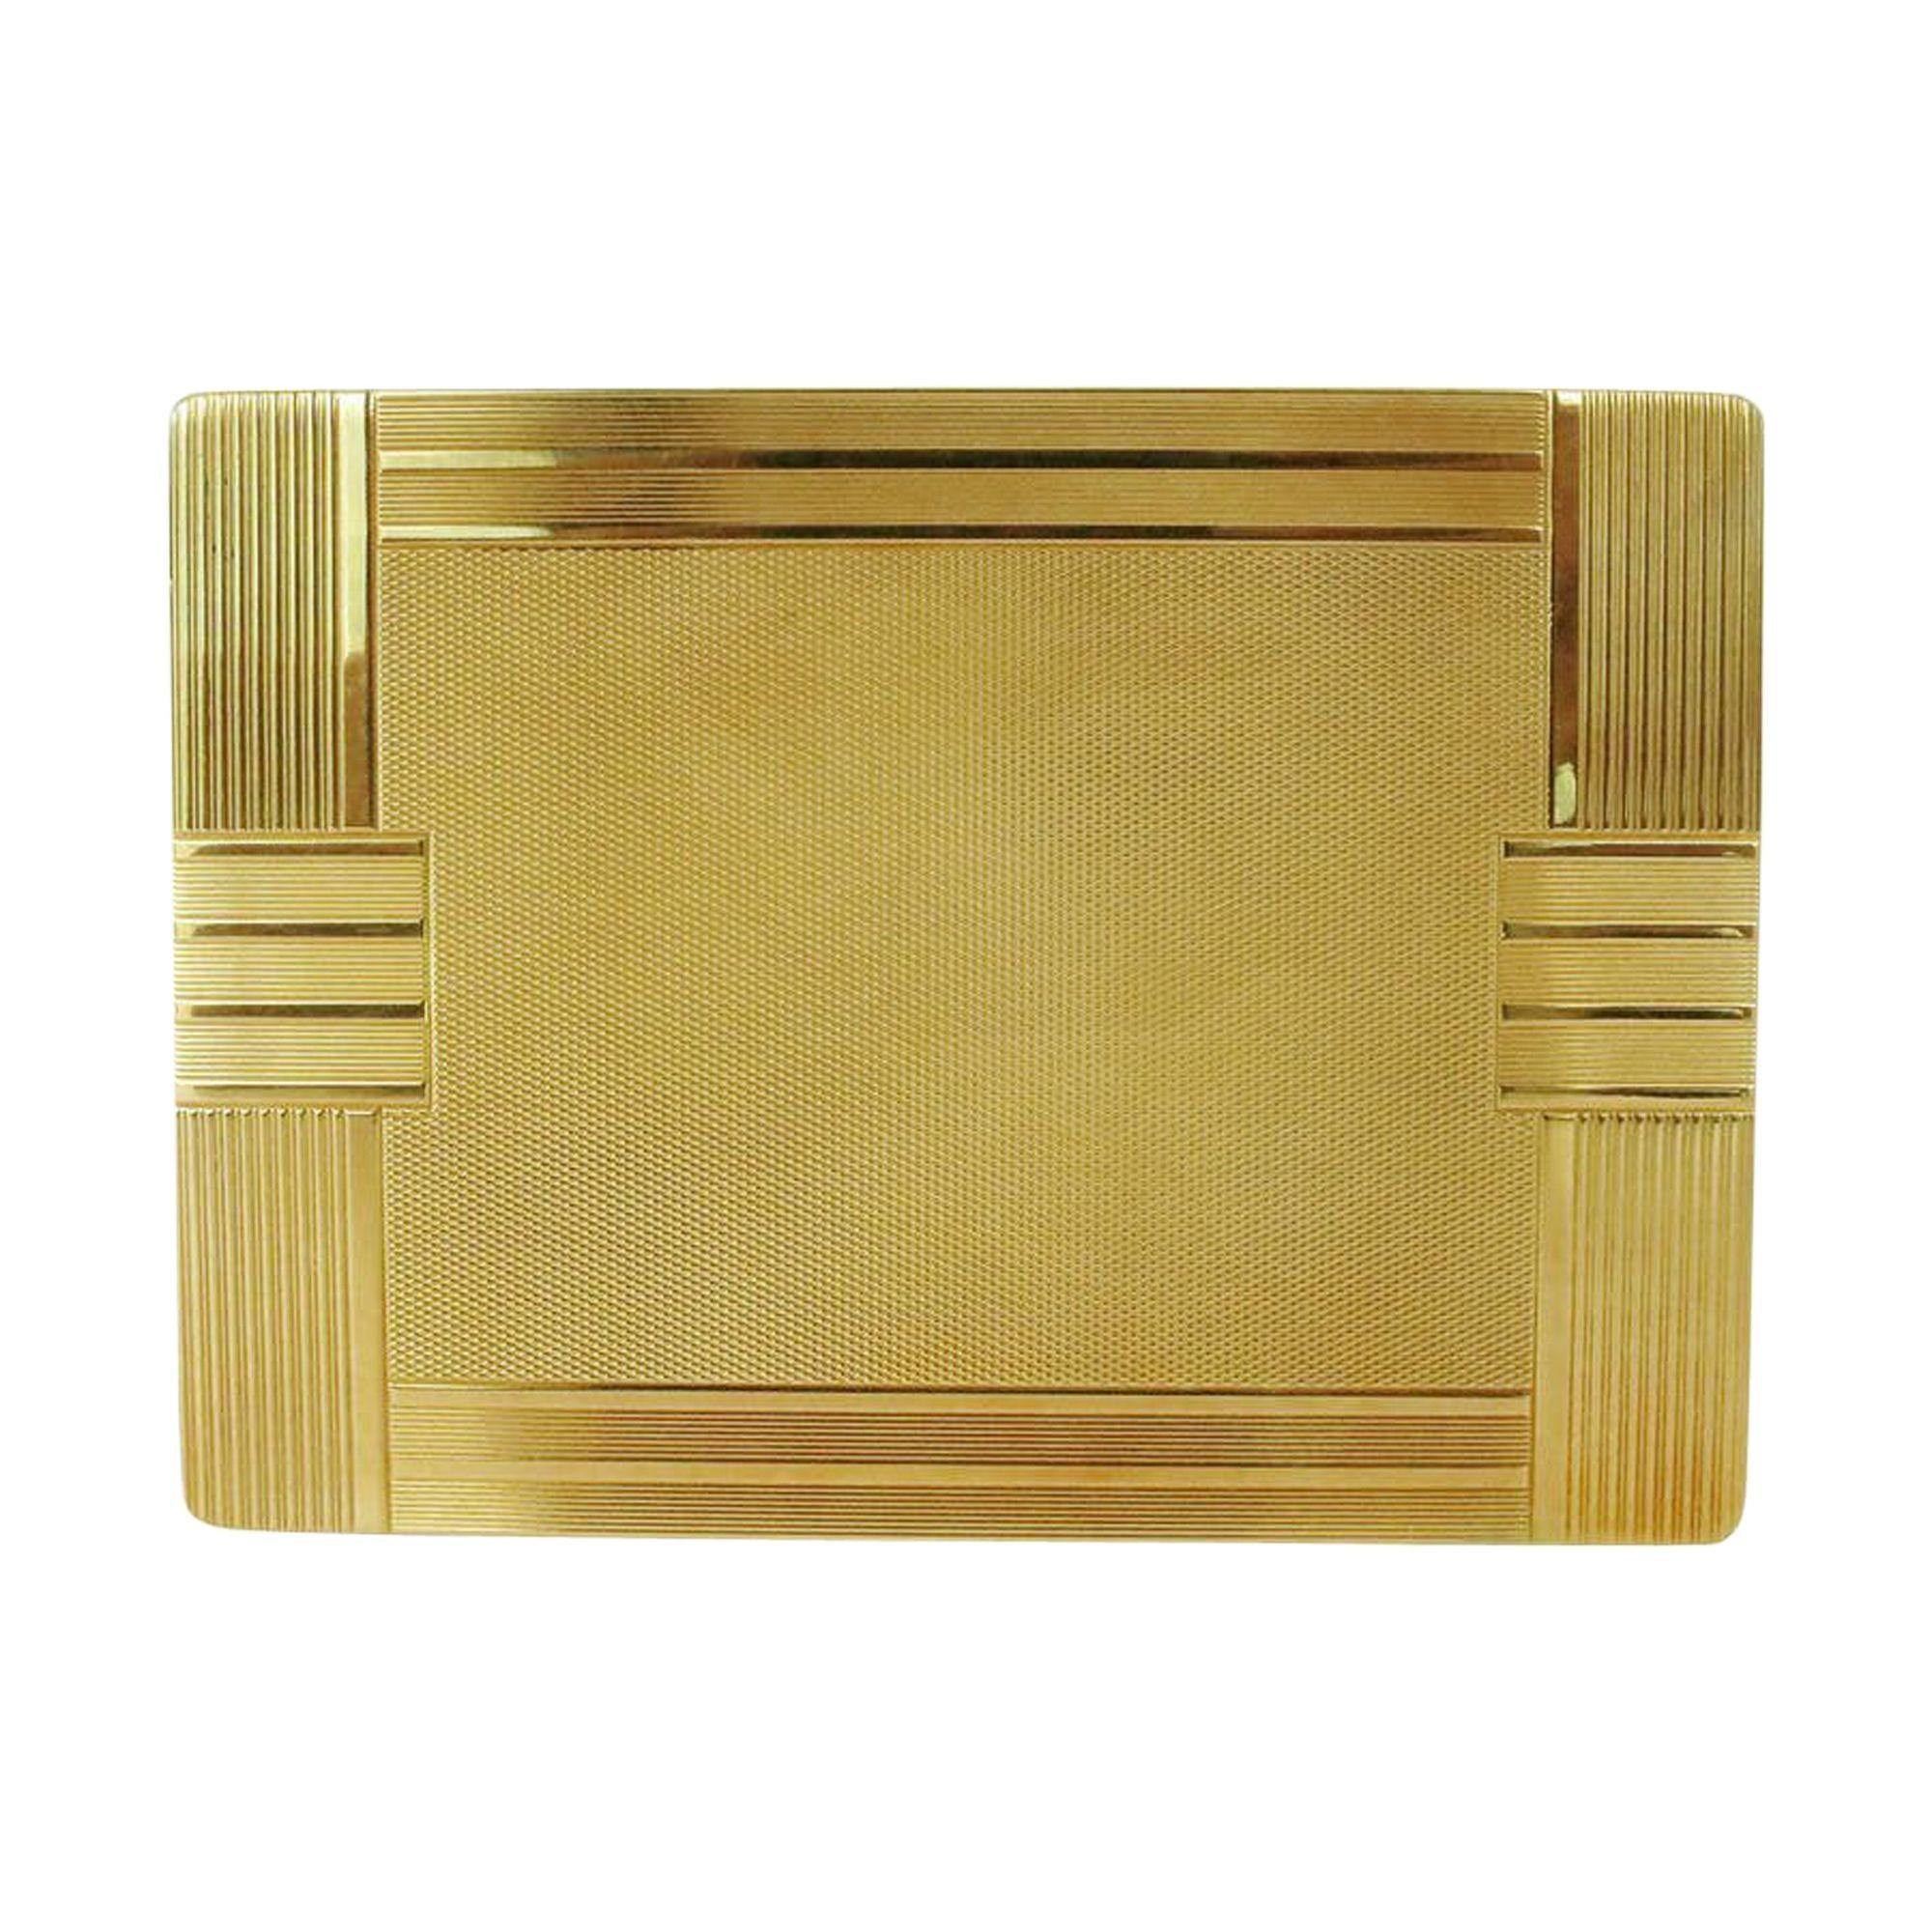 A solid 18-karat gold case with geometric Art Deco lines, this cigarette case has lines textured along the exterior and is completed with a complex grid pattern in the center. It has a hidden latch to open

It also comes with its original slip pouch.